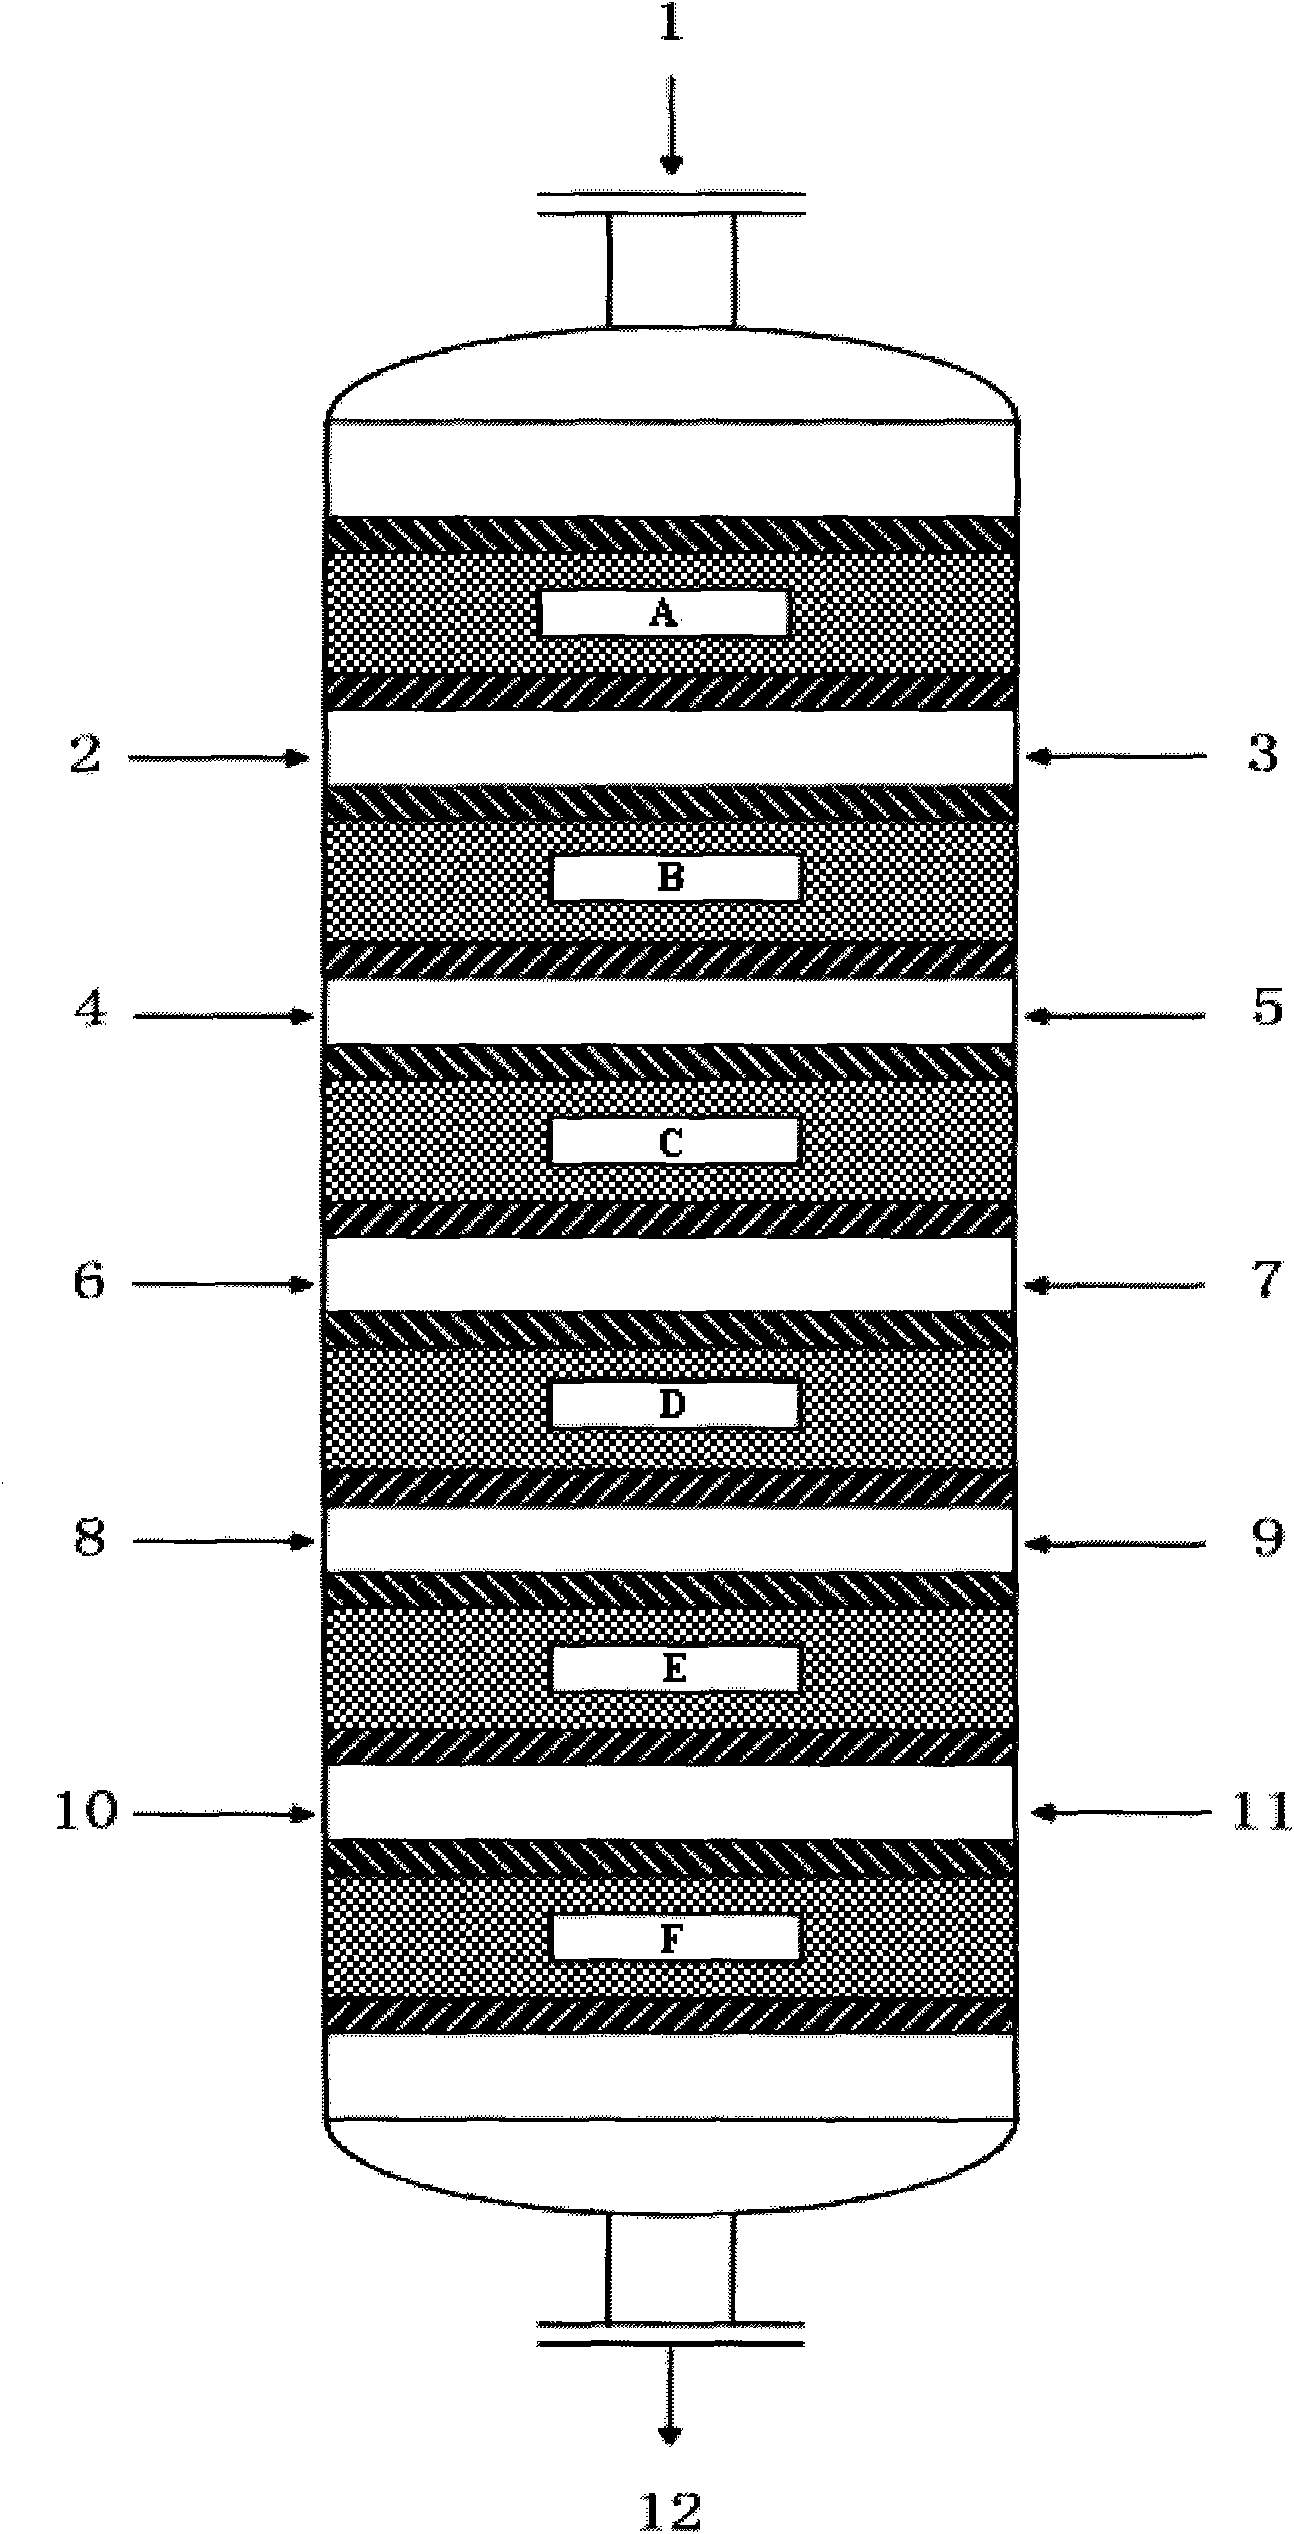 Method for producing ethylbenzene by reacting pure ethylene or dry gas with benzene